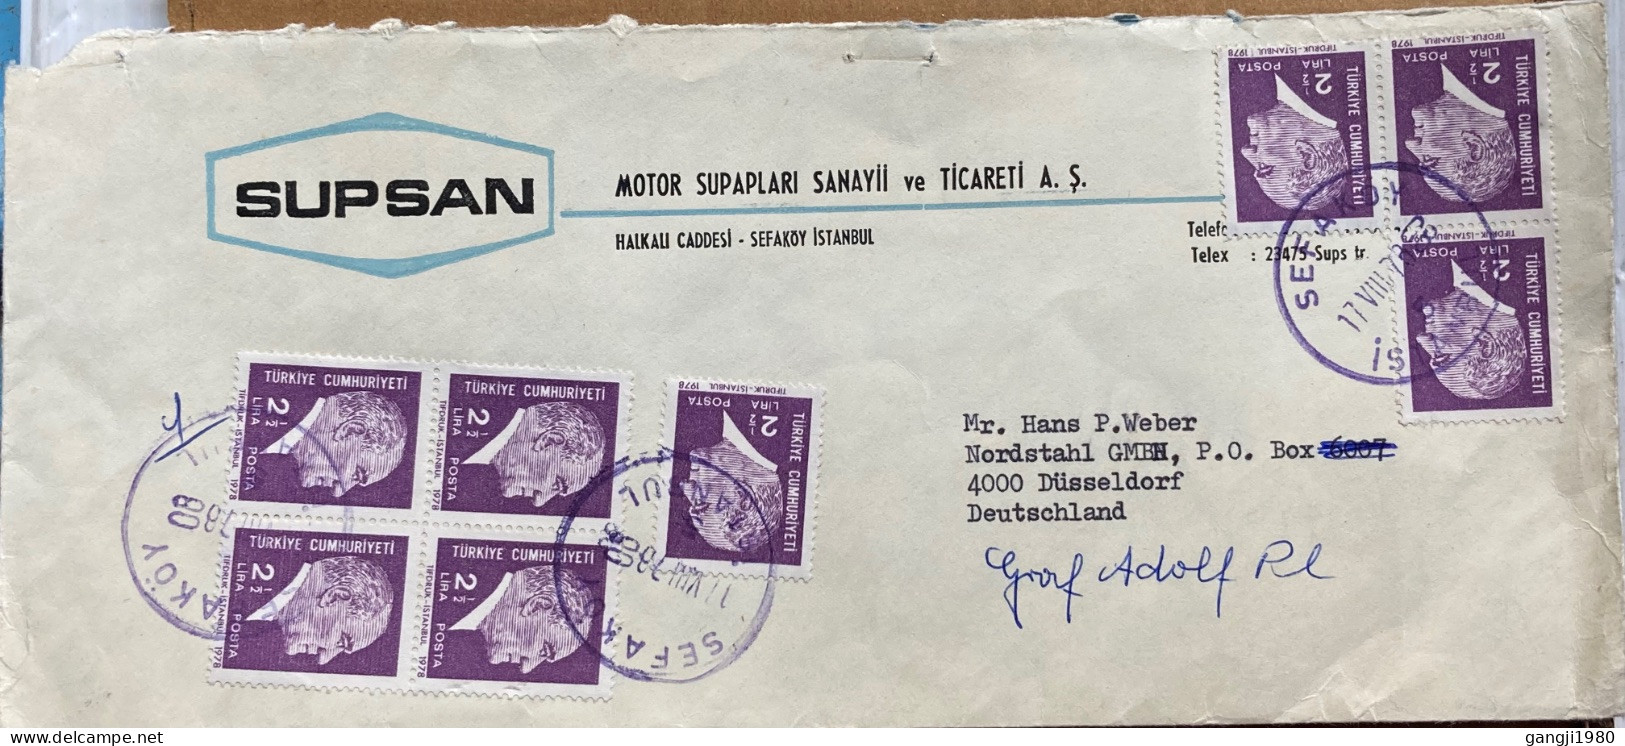 TURKEY TO GERMANY 1978, ADVERTISING COVER USED, RARE SHIPMENT NOTICE HAND STAMP BACKSIDE, SUPSAN MOTAR ENGINE VALVES IND - Lettres & Documents